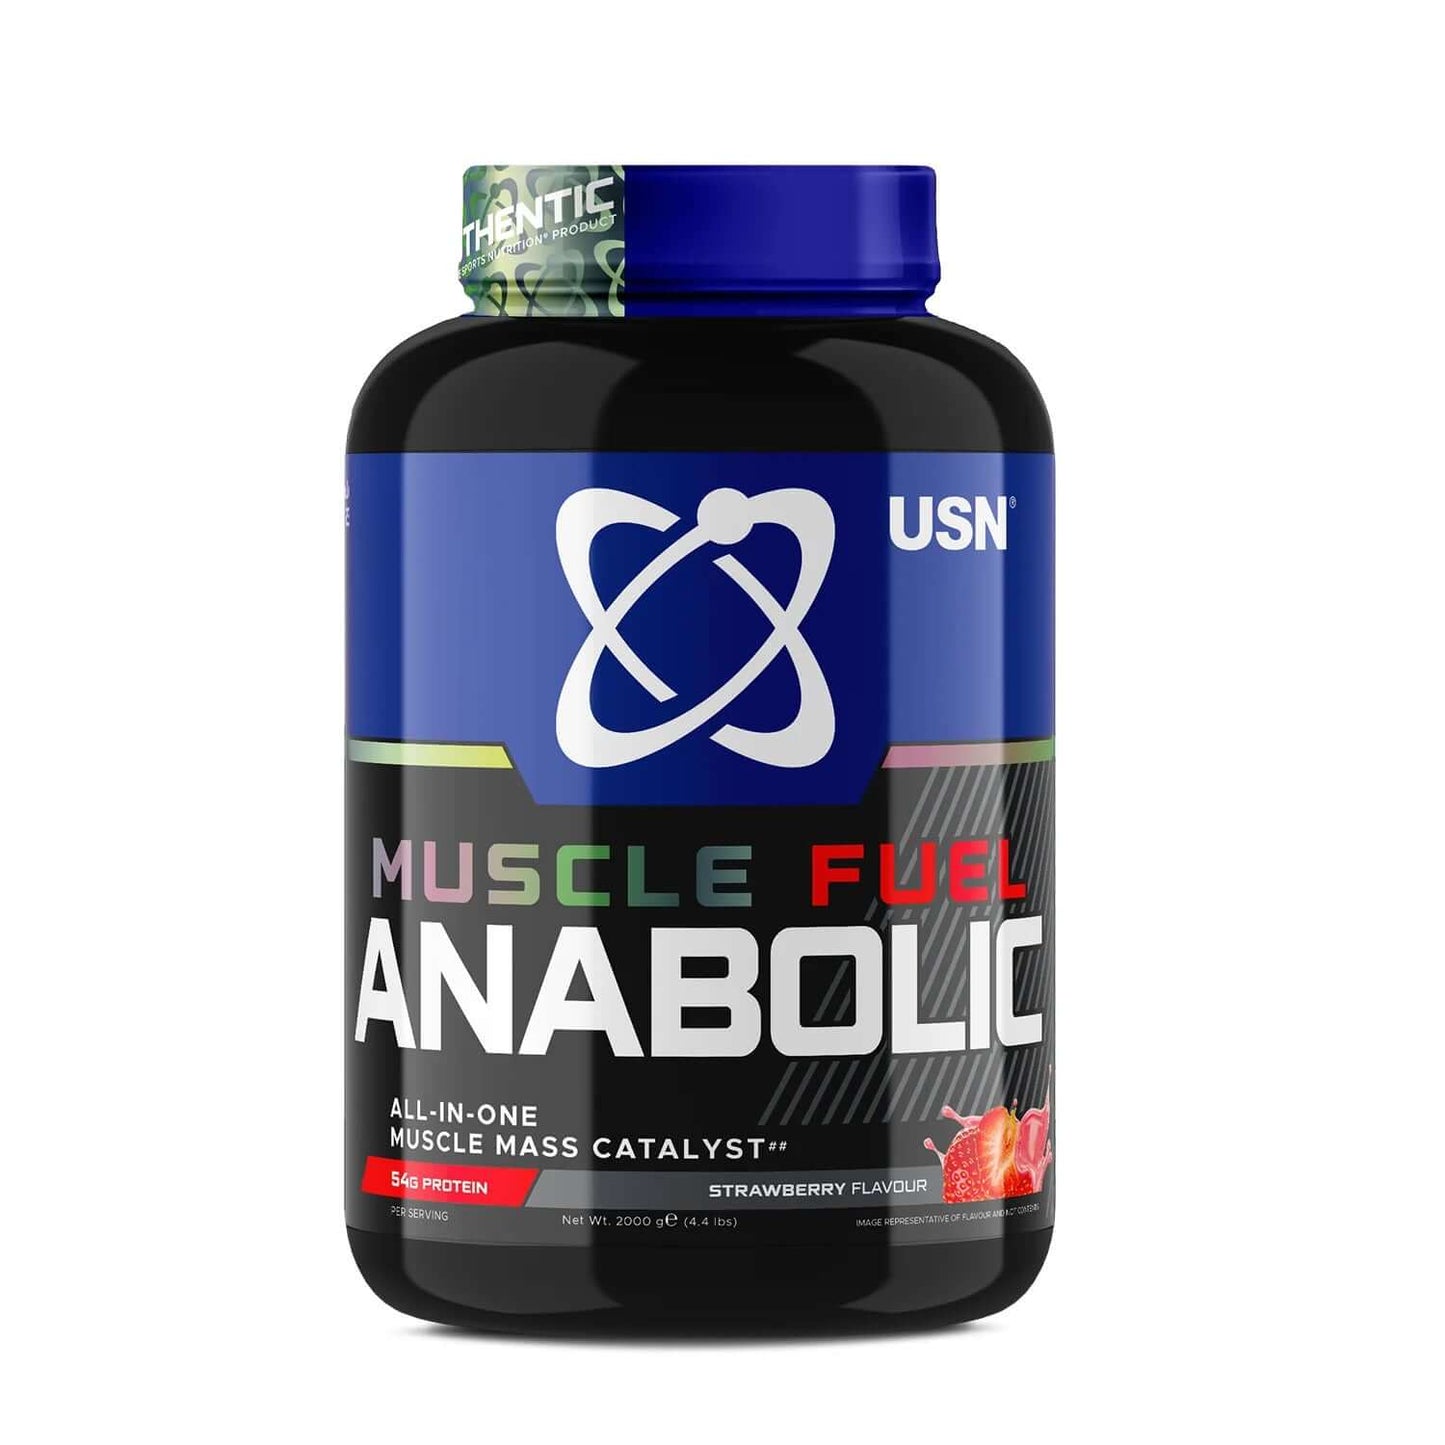 USN Muscle Fuel Anabolic Size: 2kg Flavour: Strawberry